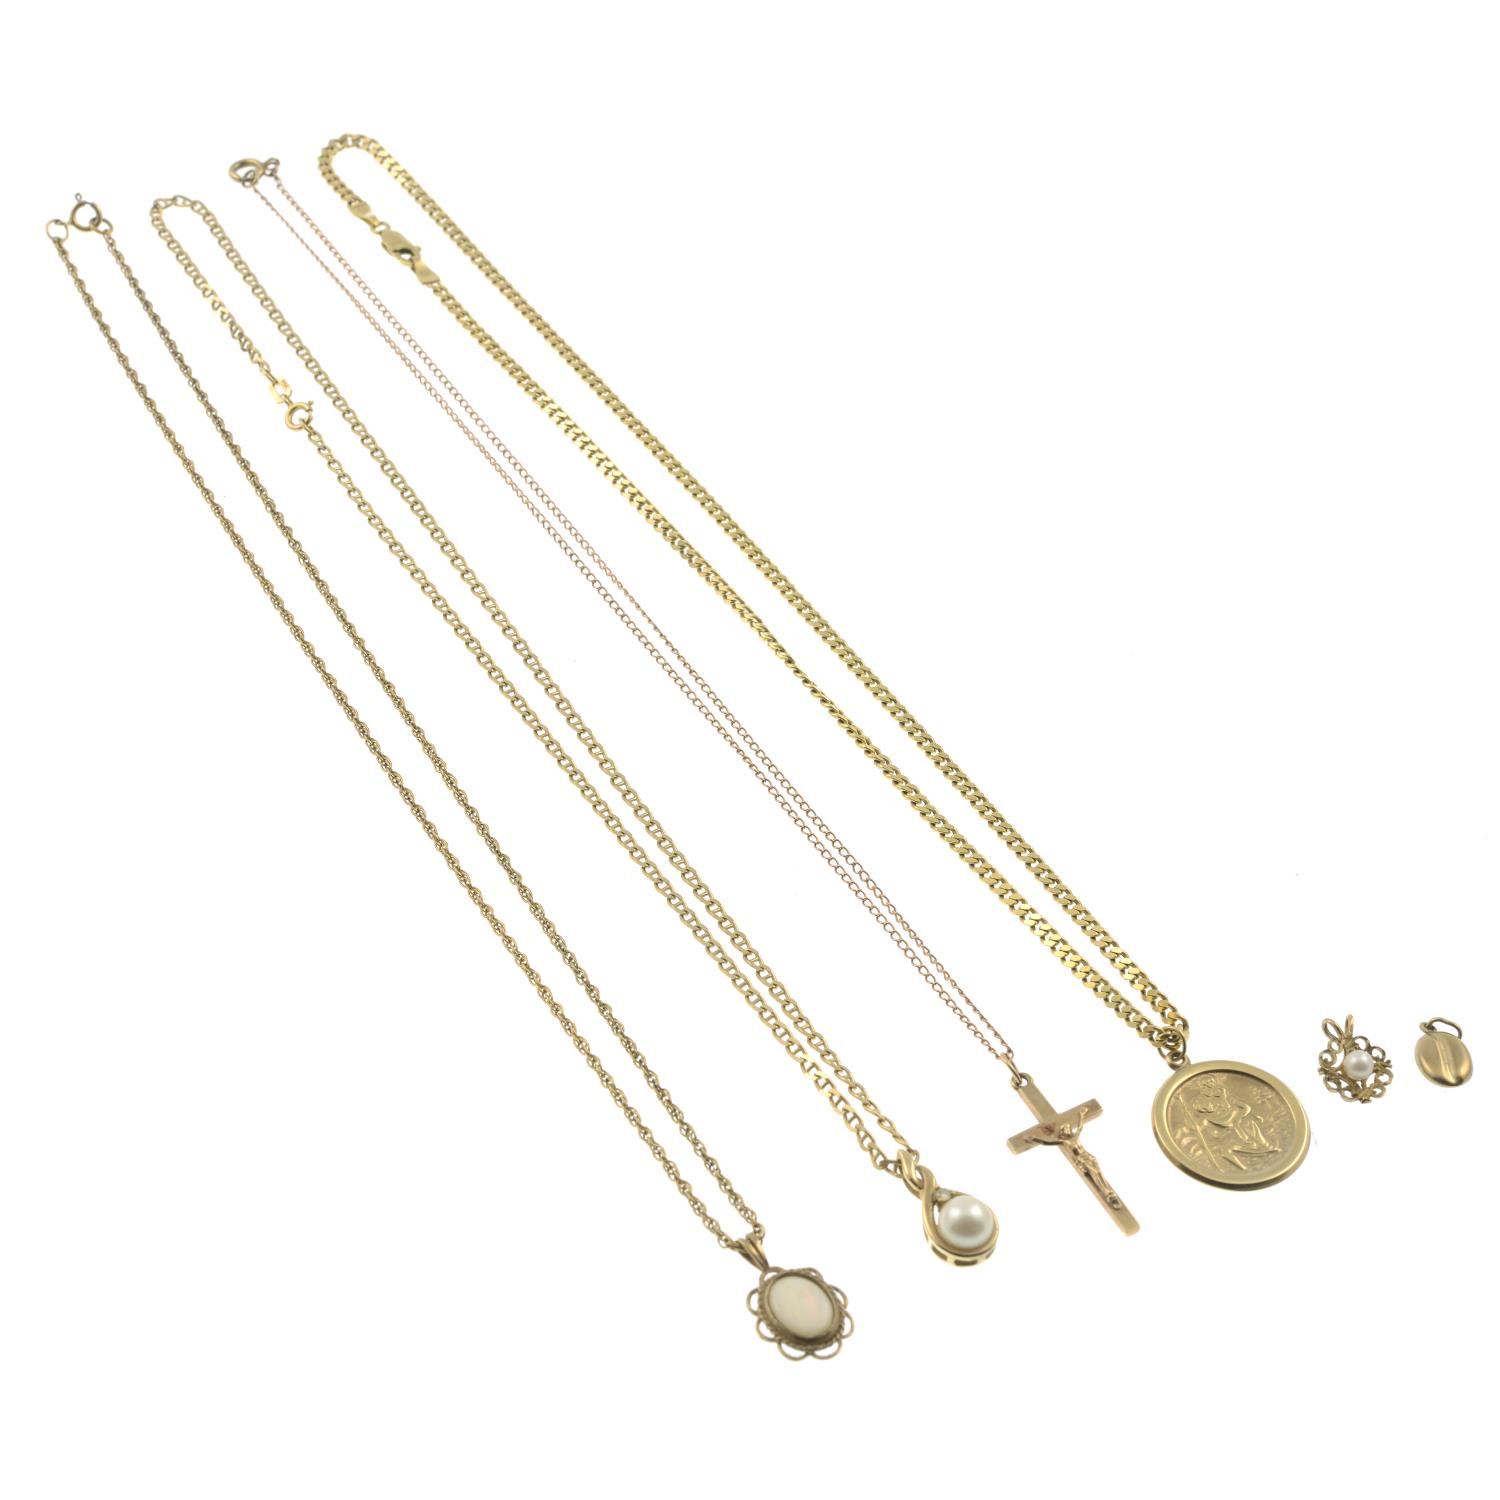 Six pendants and four chains.With marks and hallmarks for 9ct gold. - Image 2 of 2